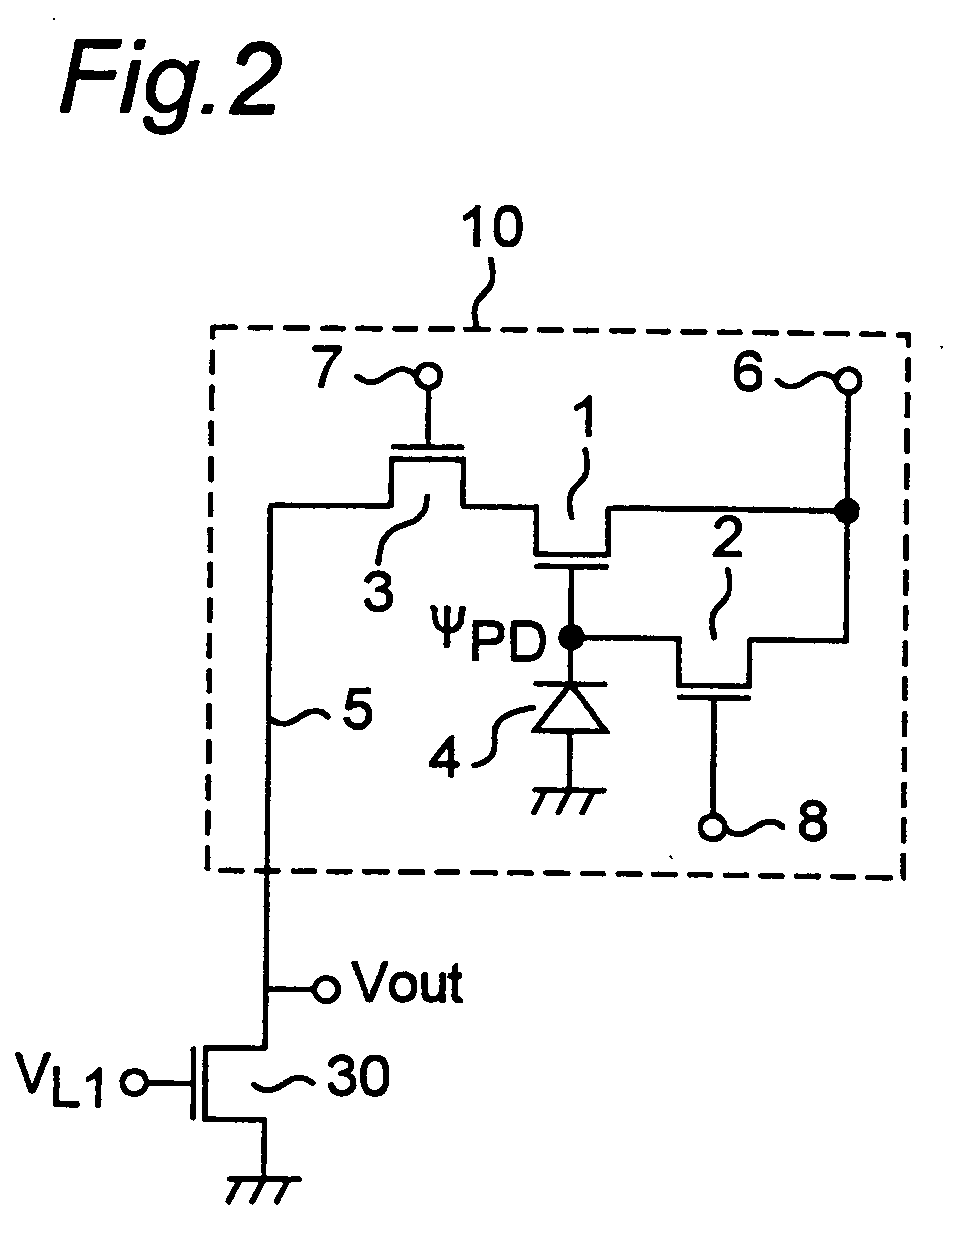 Amplification-type solid-state image pickup device incorporating plurality of arrayed pixels with amplification function